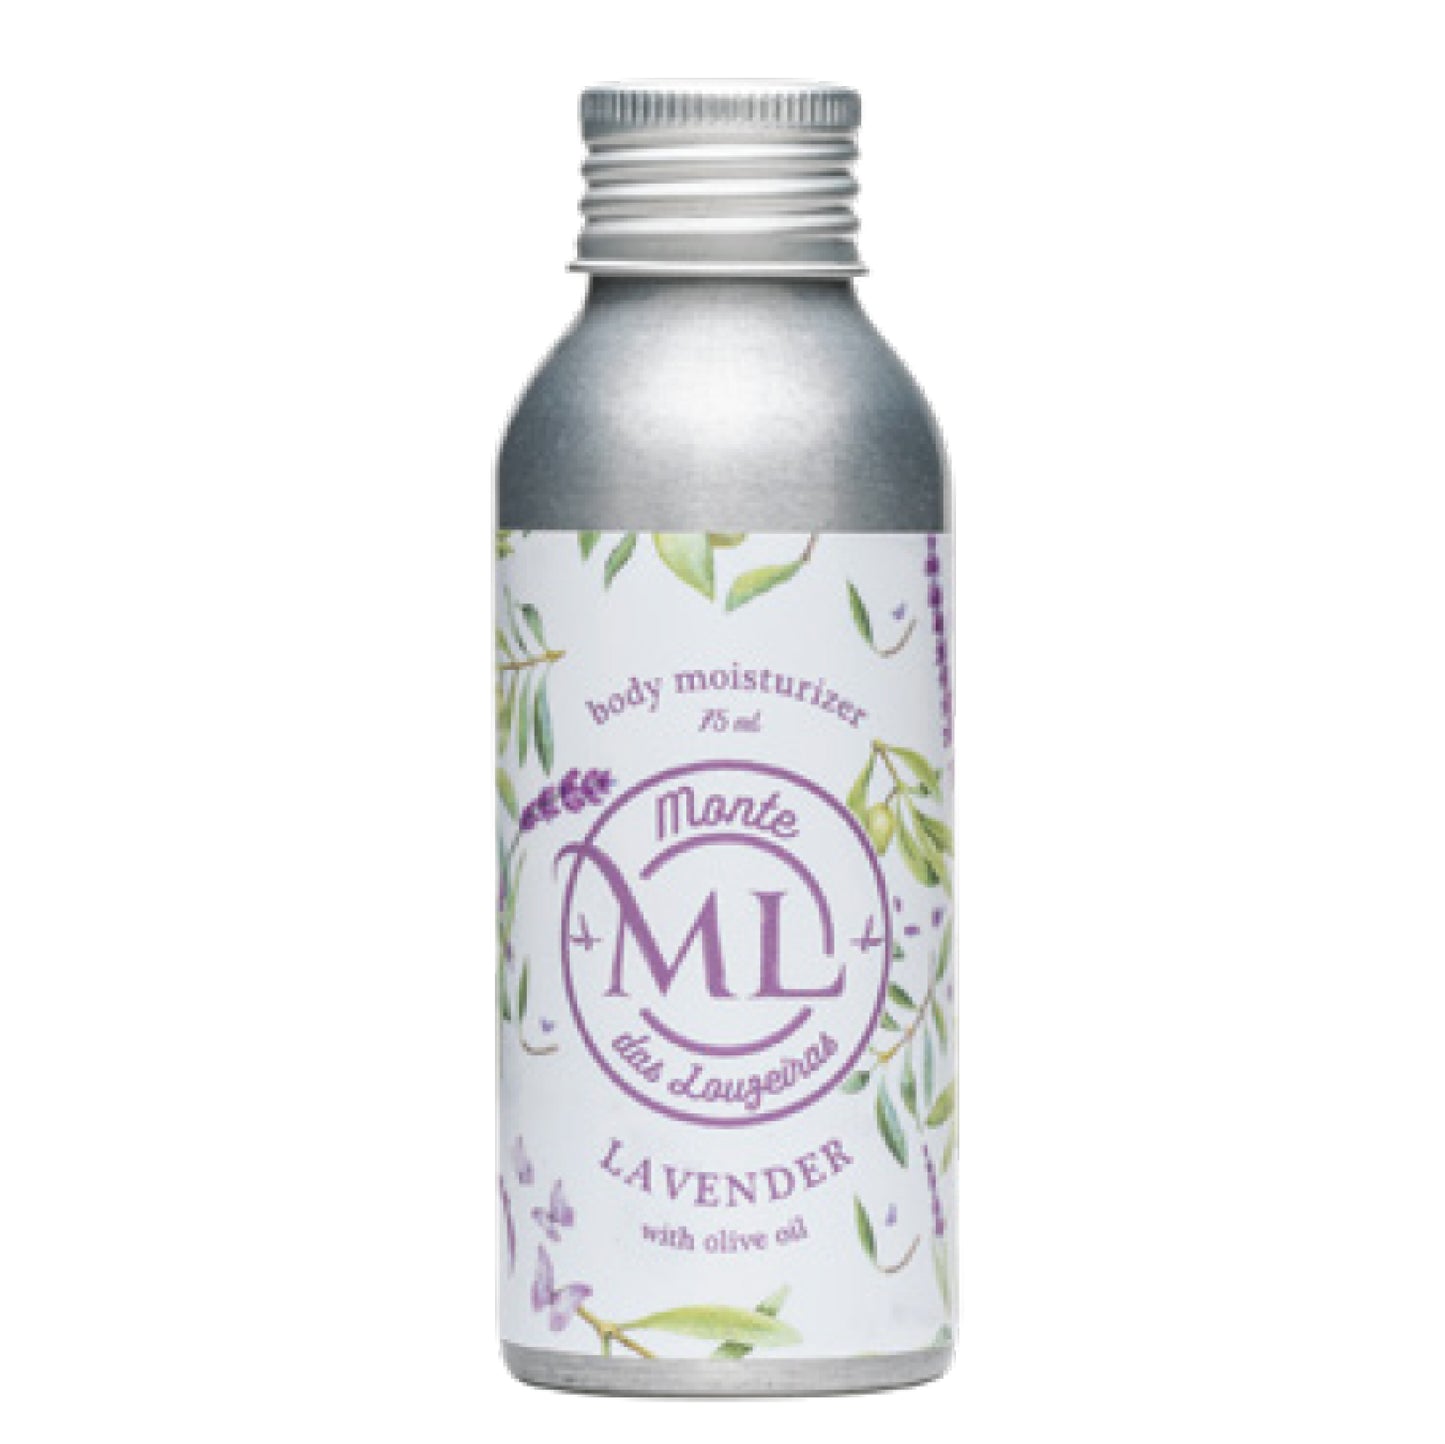 Organic - Lavender Body-Moisturizer with Olive Oil